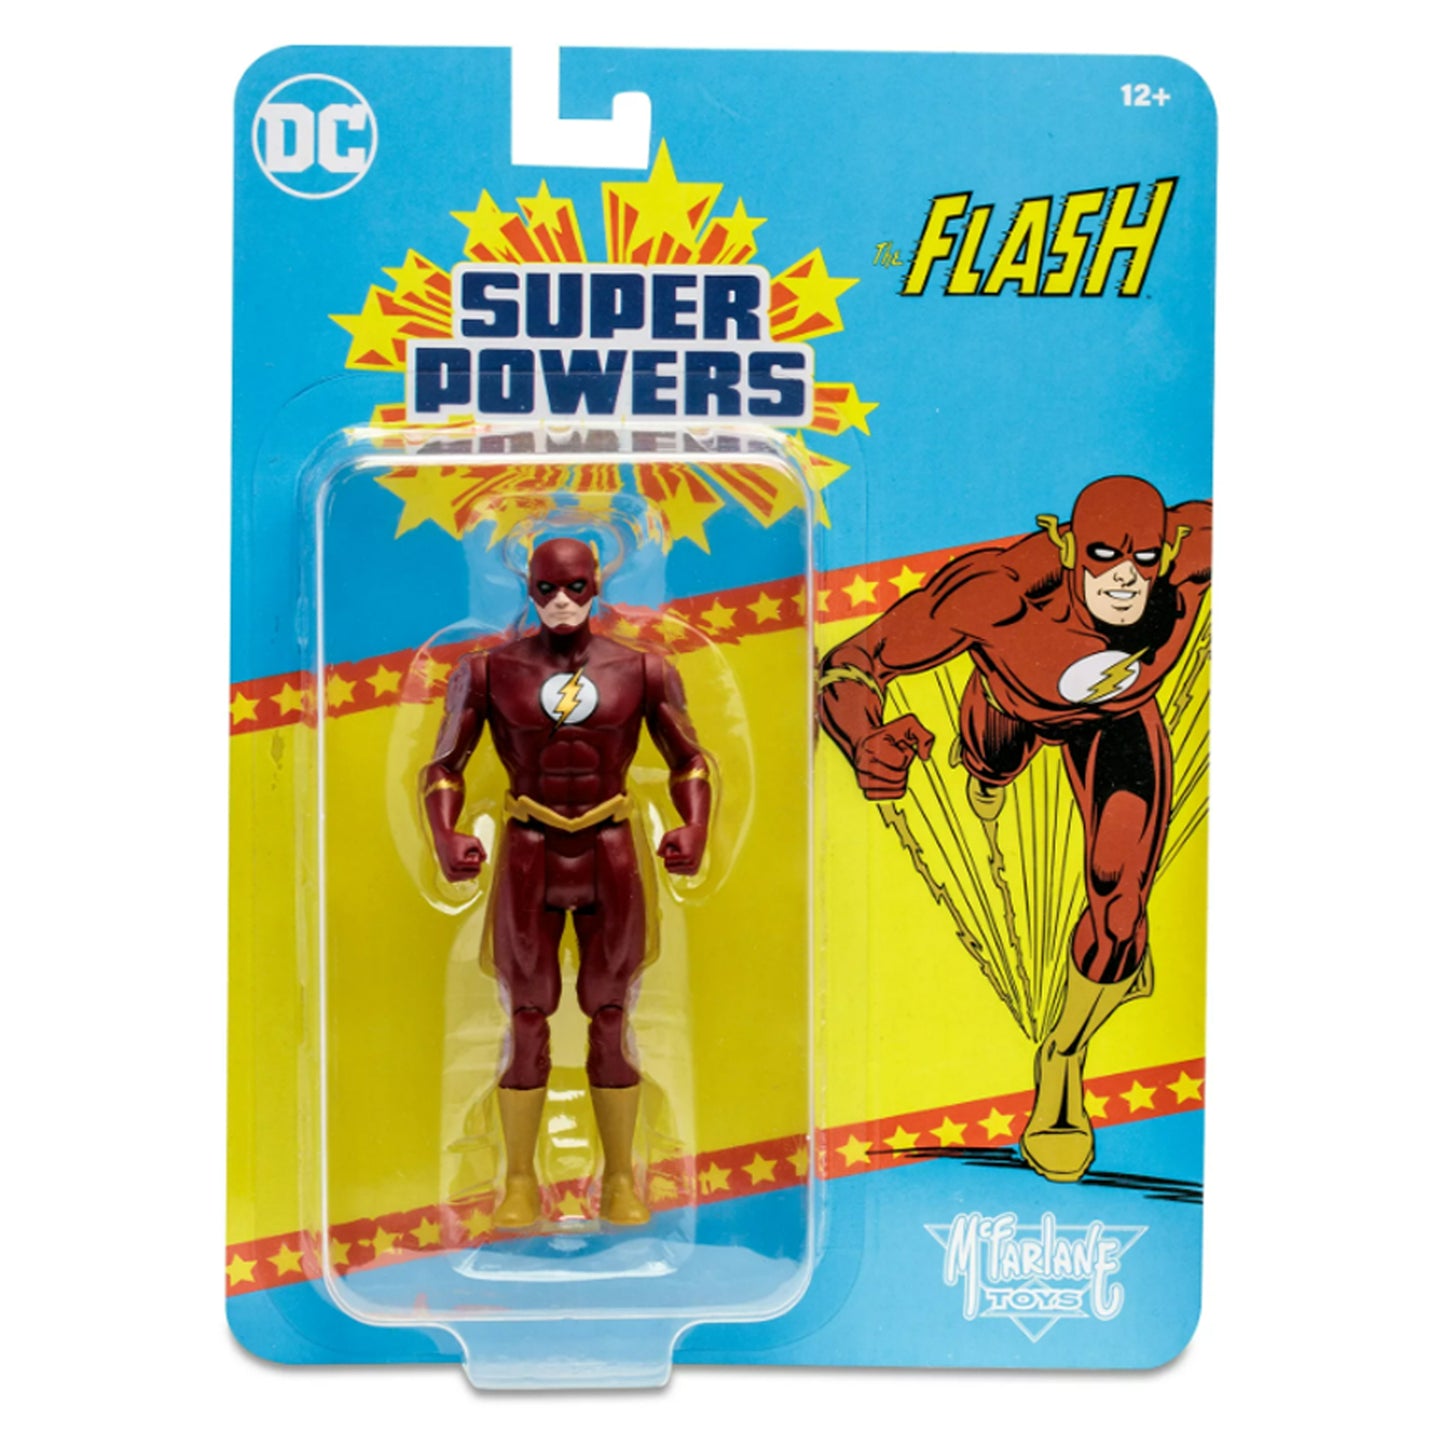 DC Super Powers Flash (Opposites Attract)